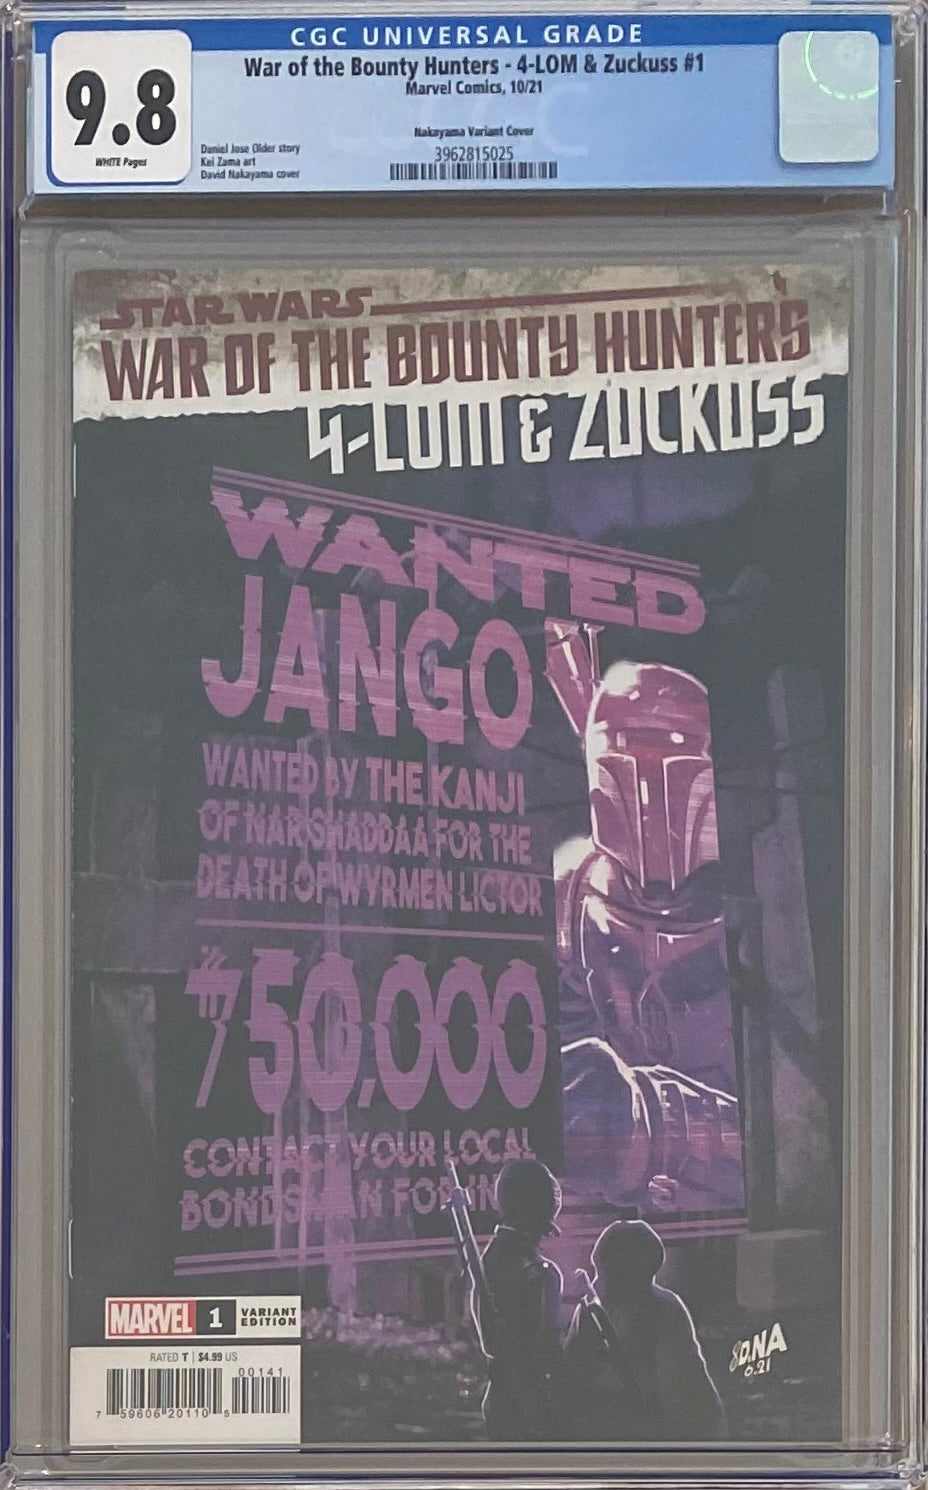 Star Wars: War of the Bounty Hunters - 4-Lom & Zuckuss #1 Wanted Poster Variant CGC 9.8